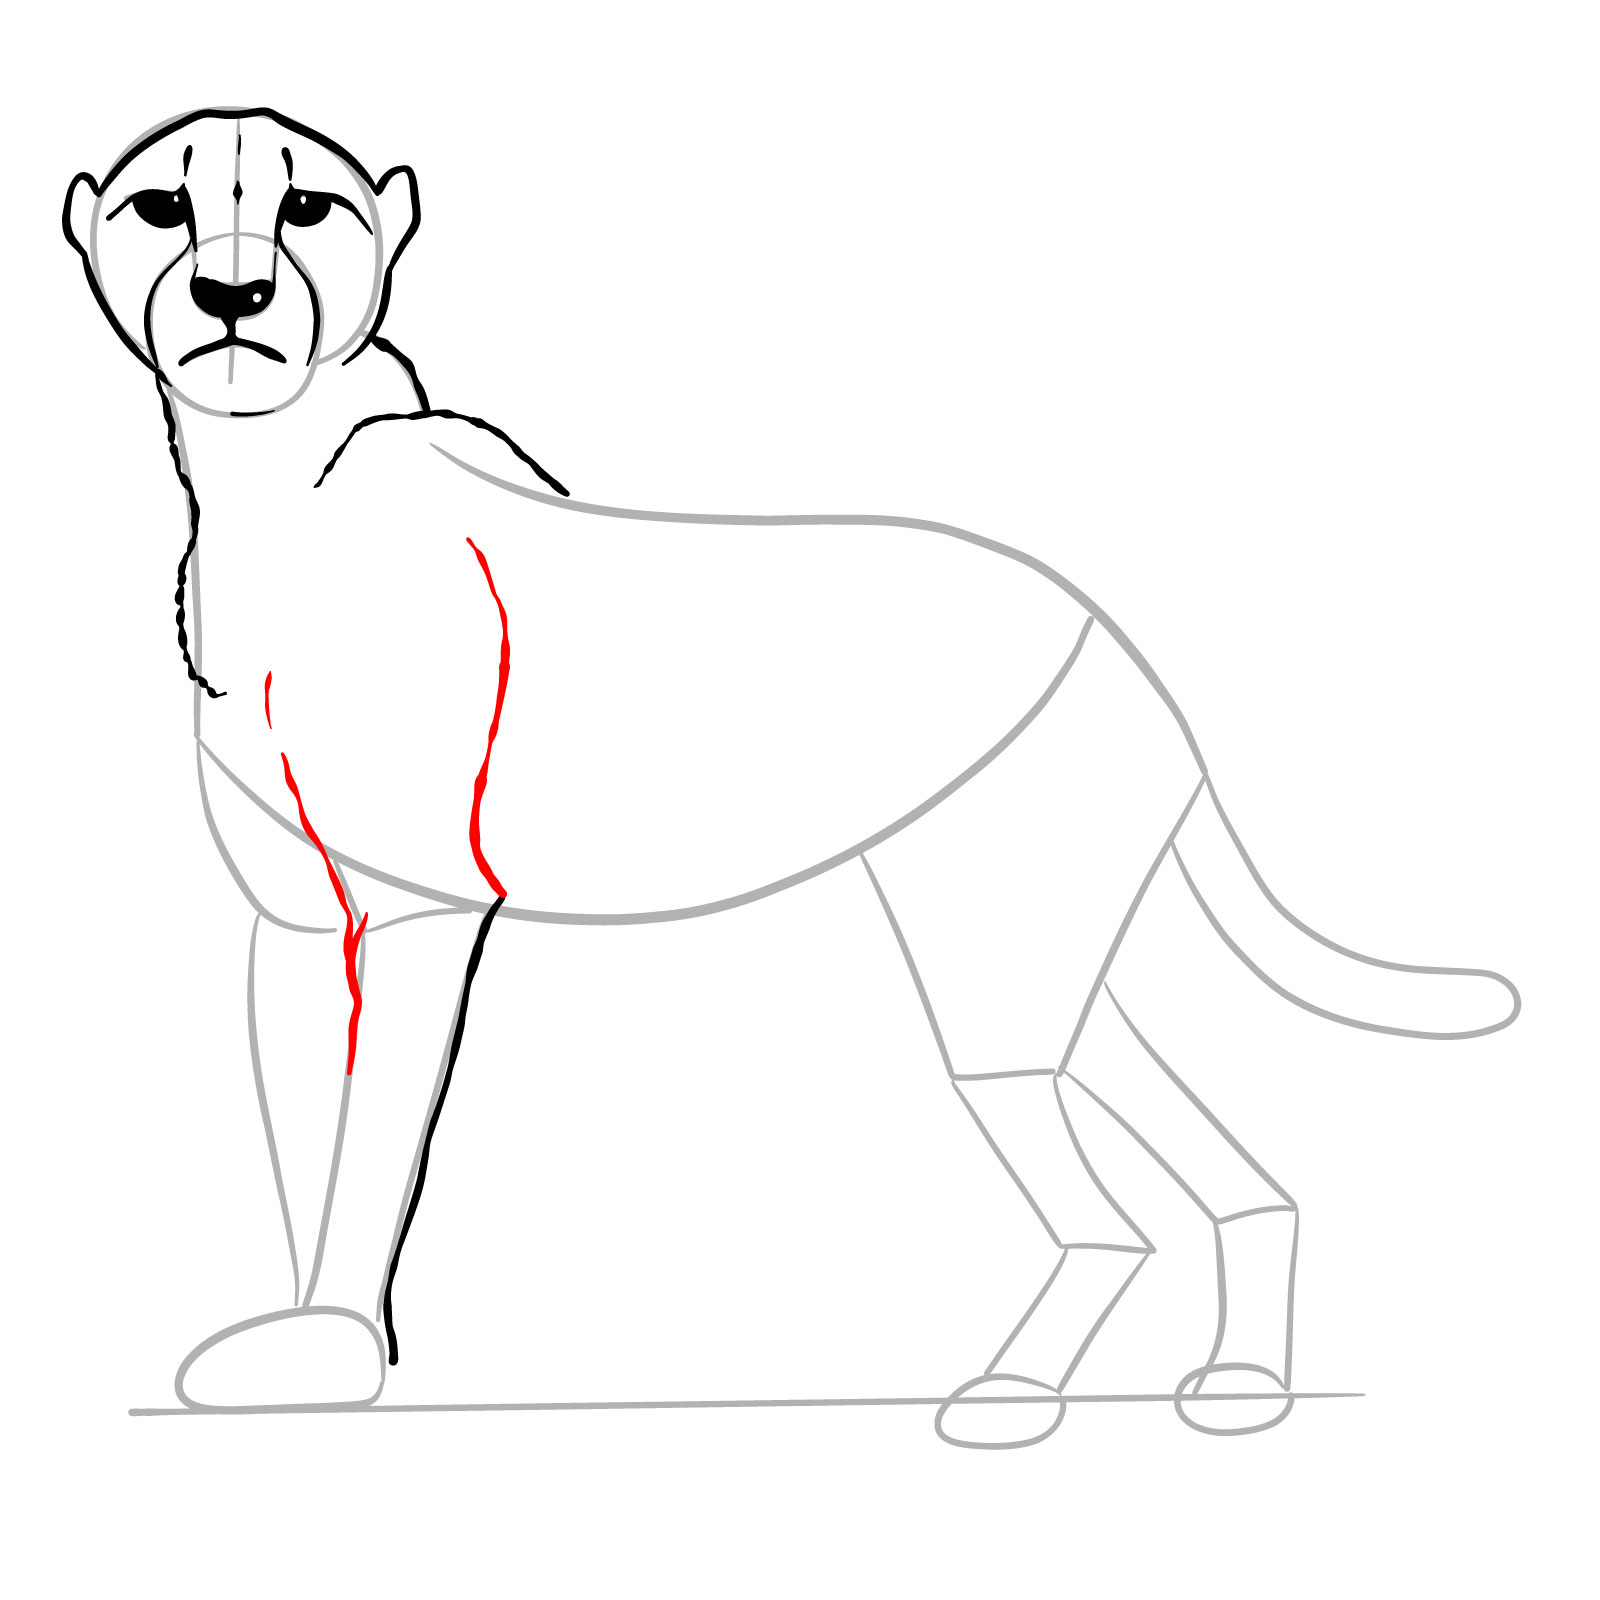 How to draw a Cheetah - step 14